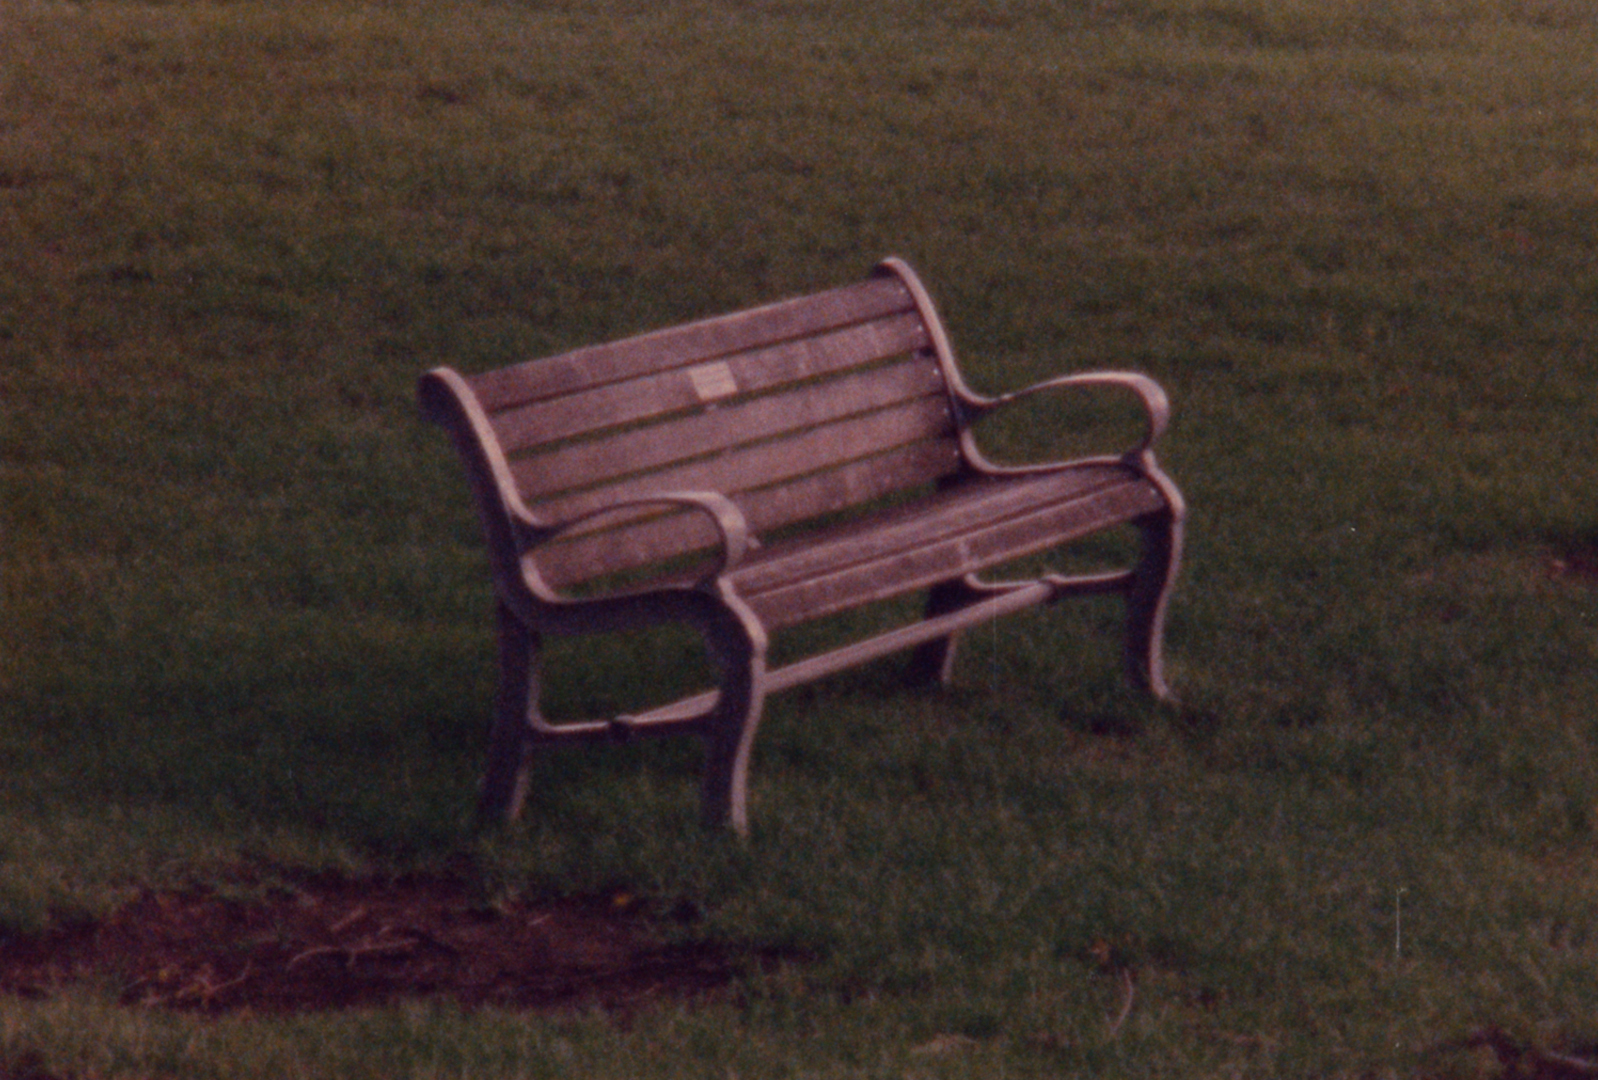 A film still image of a park bench in a field of grass